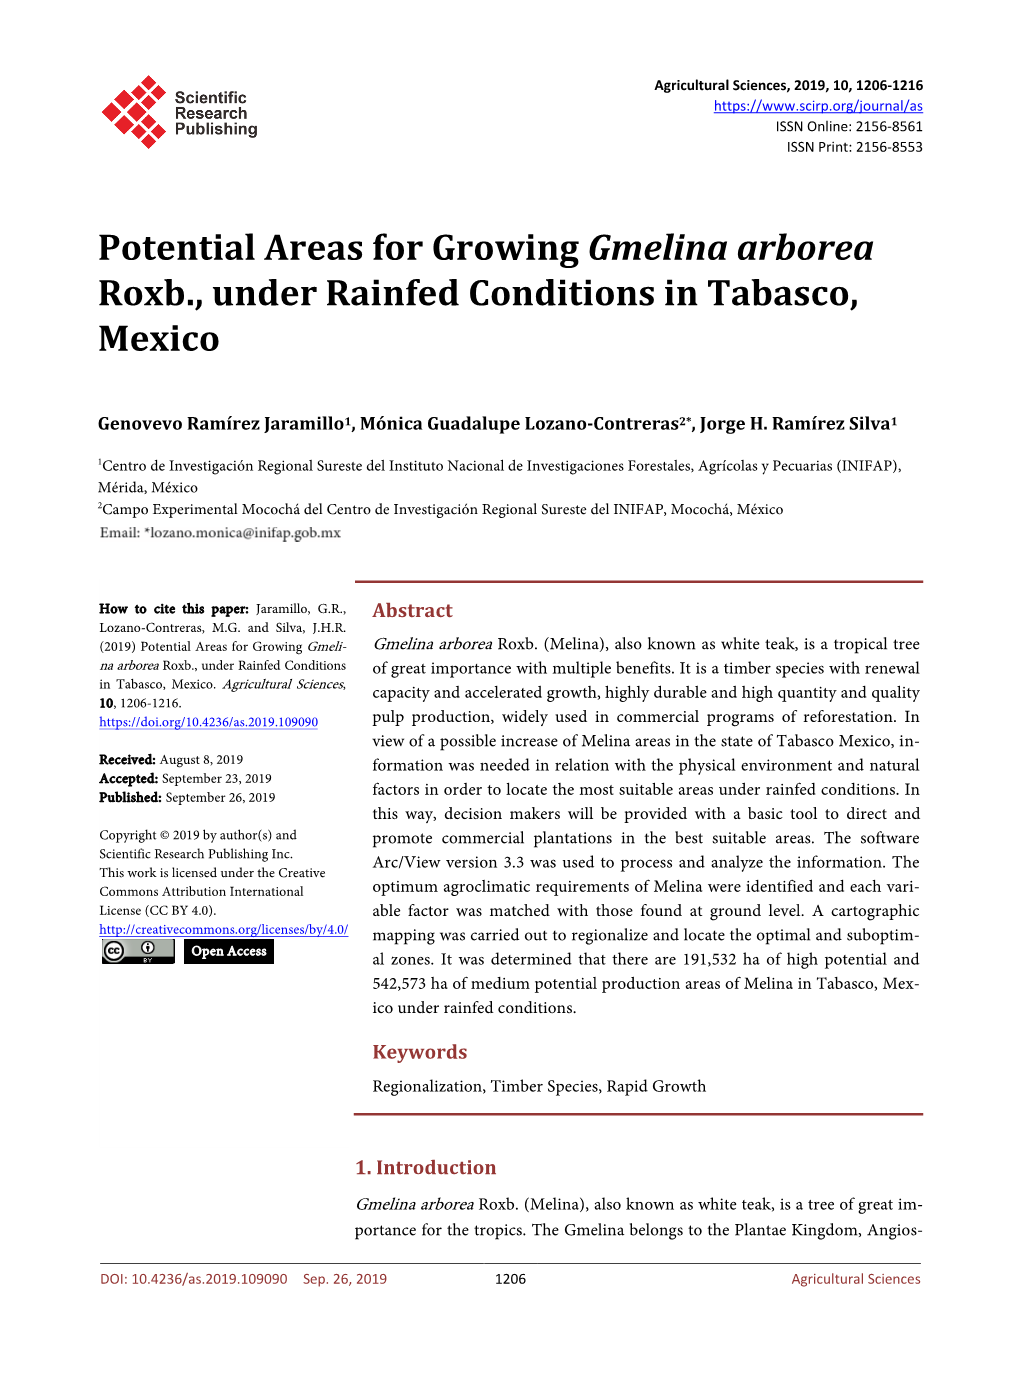 Potential Areas for Growing Gmelina Arborea Roxb., Under Rainfed Conditions in Tabasco, Mexico